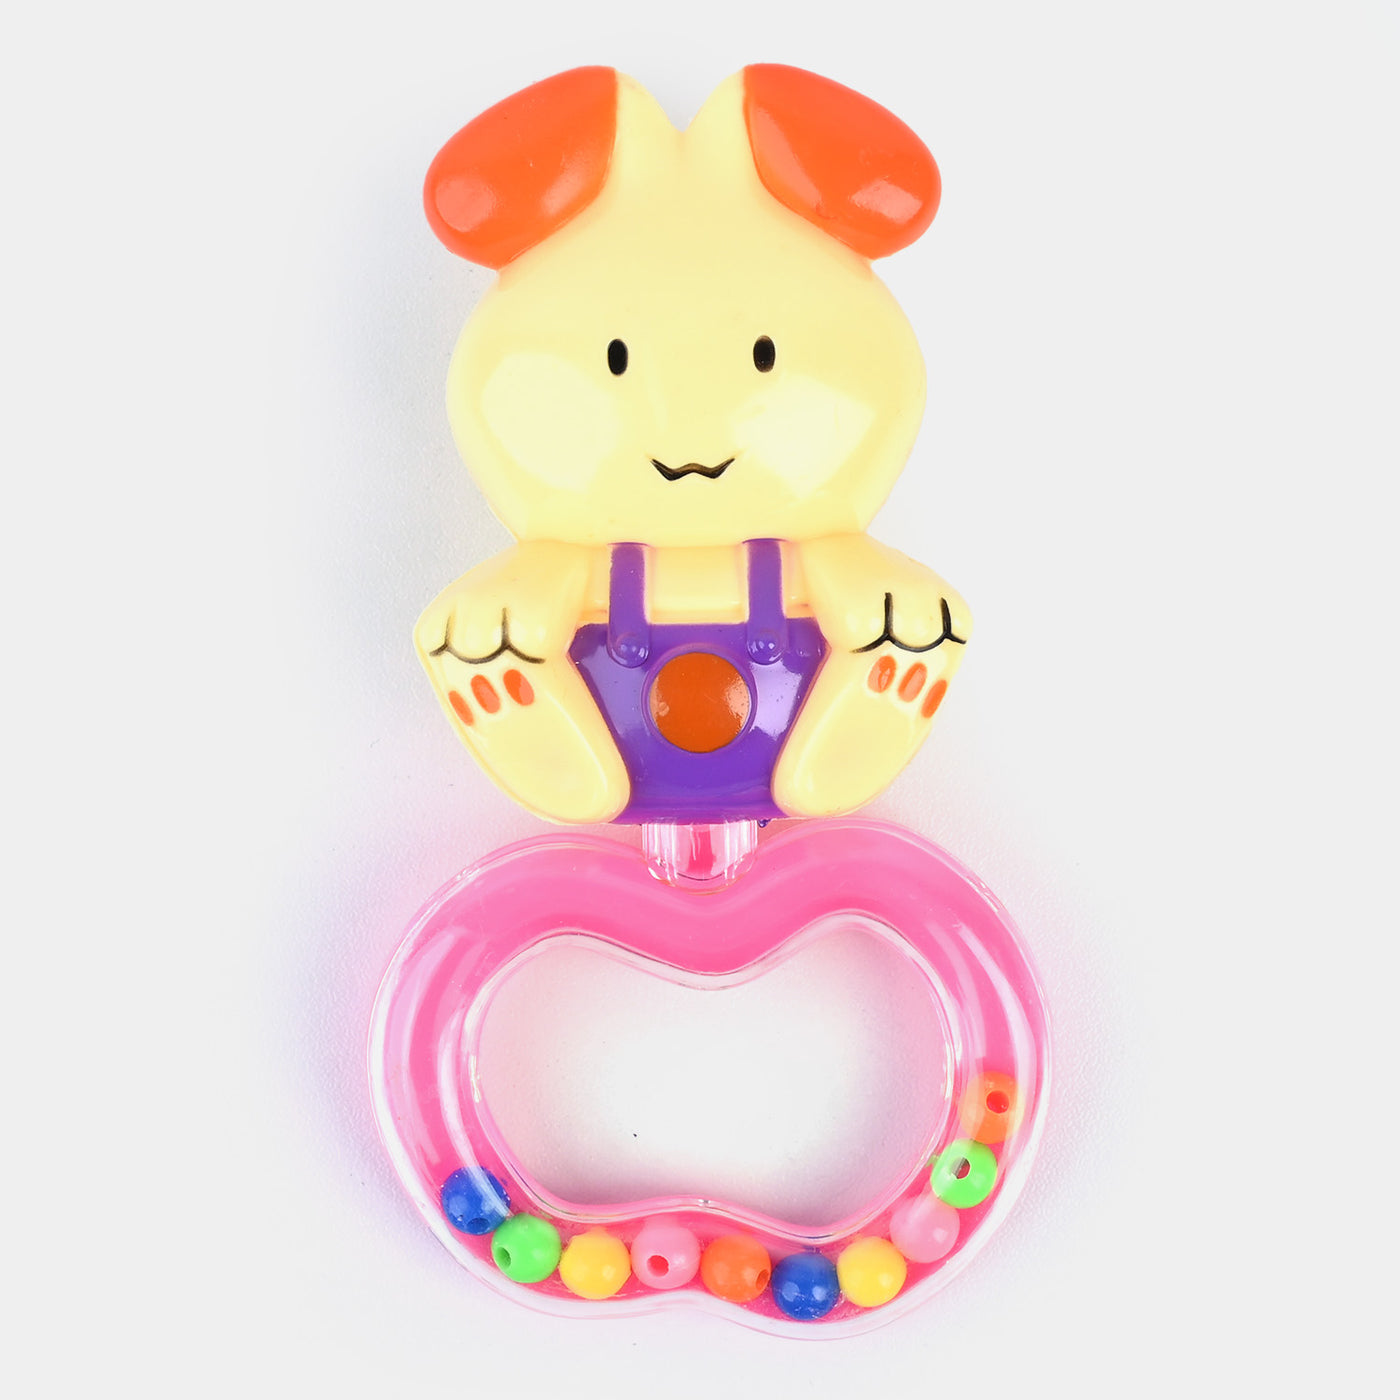 Baby Rattle Play Set For Kids